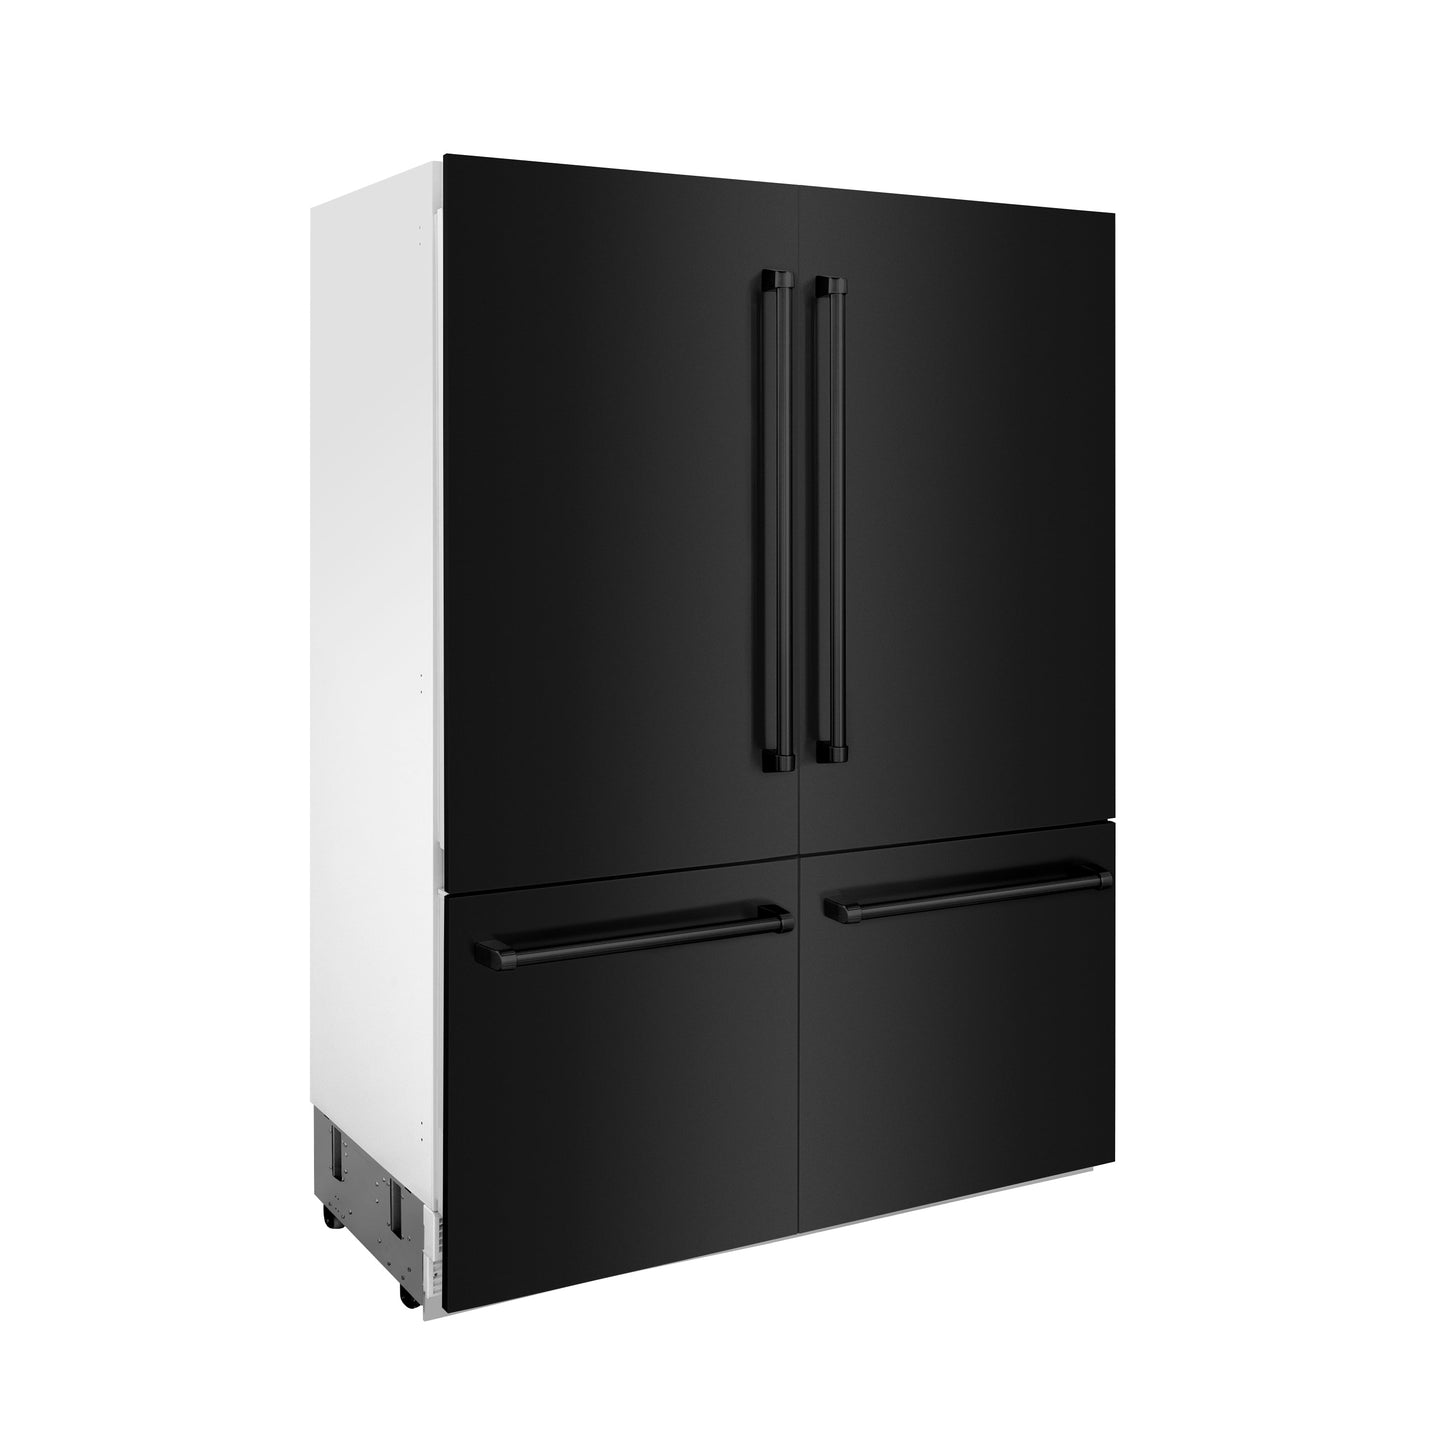 ZLINE 60" 32.2 cu. ft. Built-In Refrigerator with Internal Water and Ice Dispenser in Black Stainless Steel, RBIV-BS-60